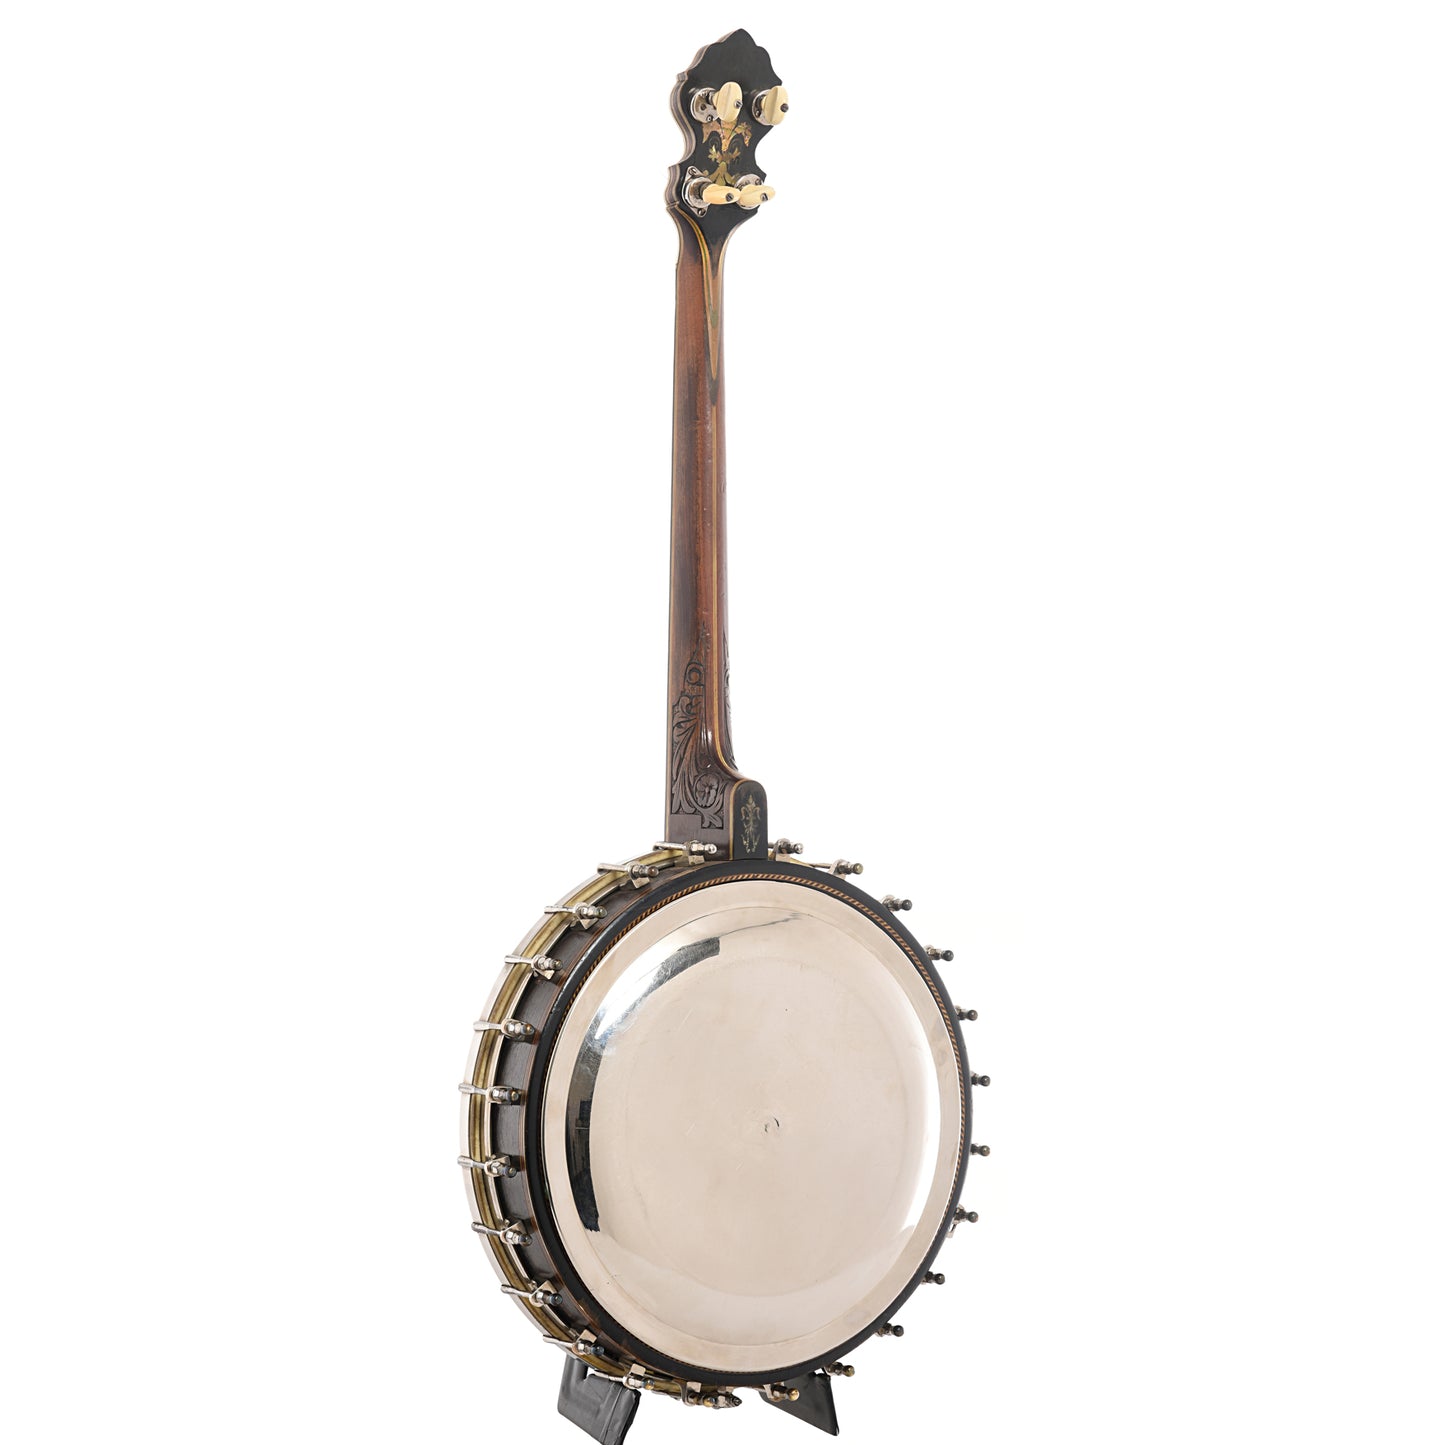 Full back and side of Orpheum No.3 Special Tenor Banjo (c.1919)